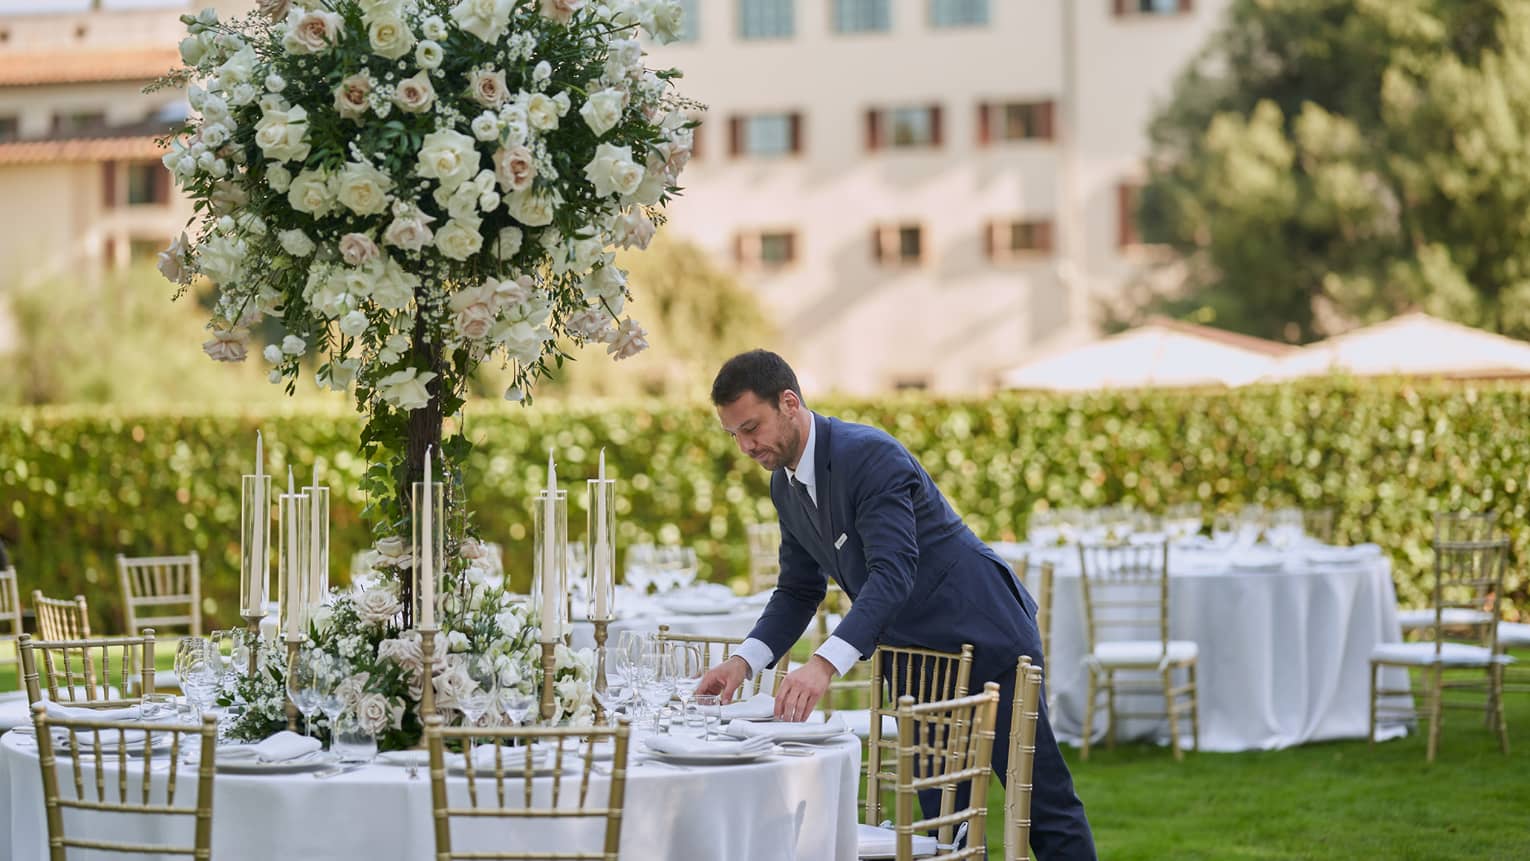 Man in suit sets garden wedding reception tables with large white topiary and hotel in backdrop